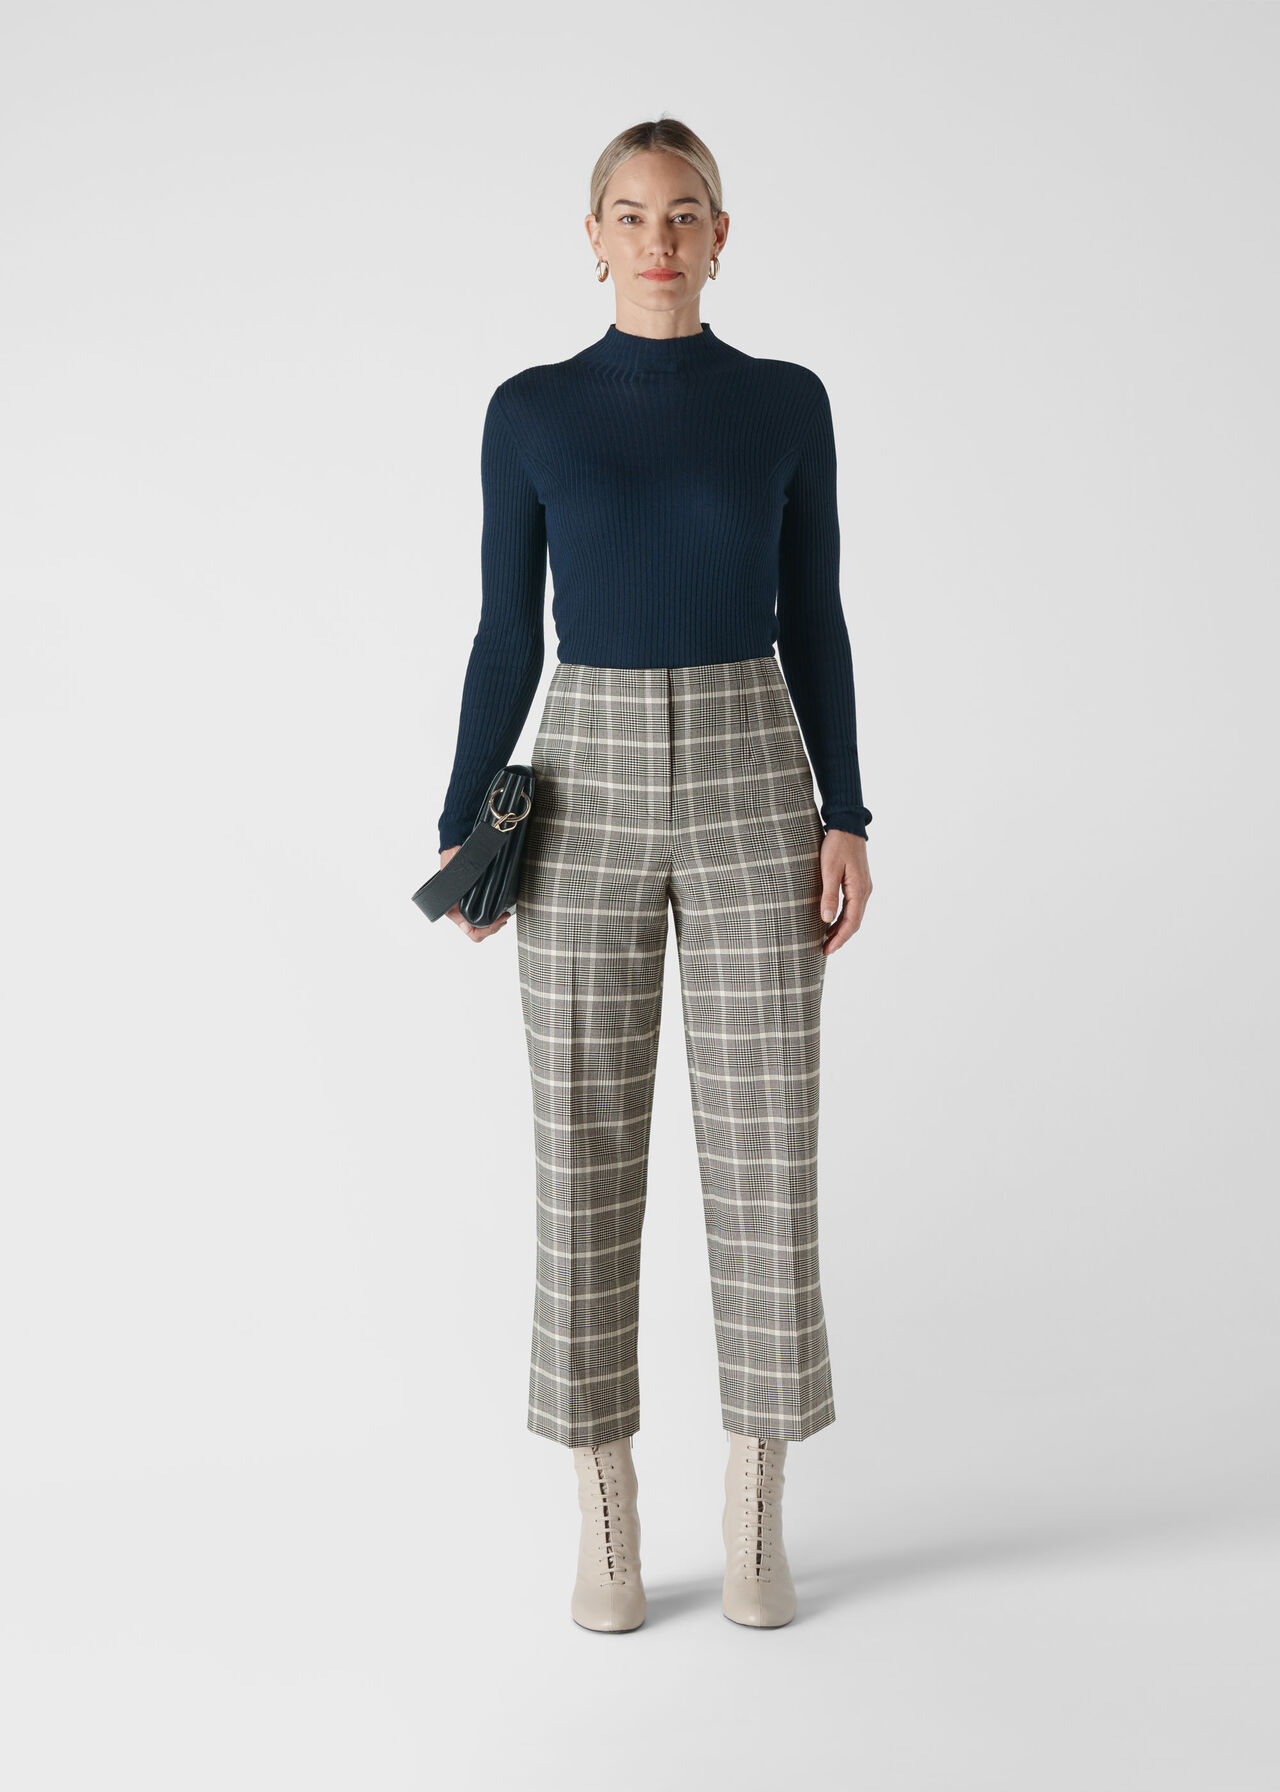 Courtney Check Trouser Black and White